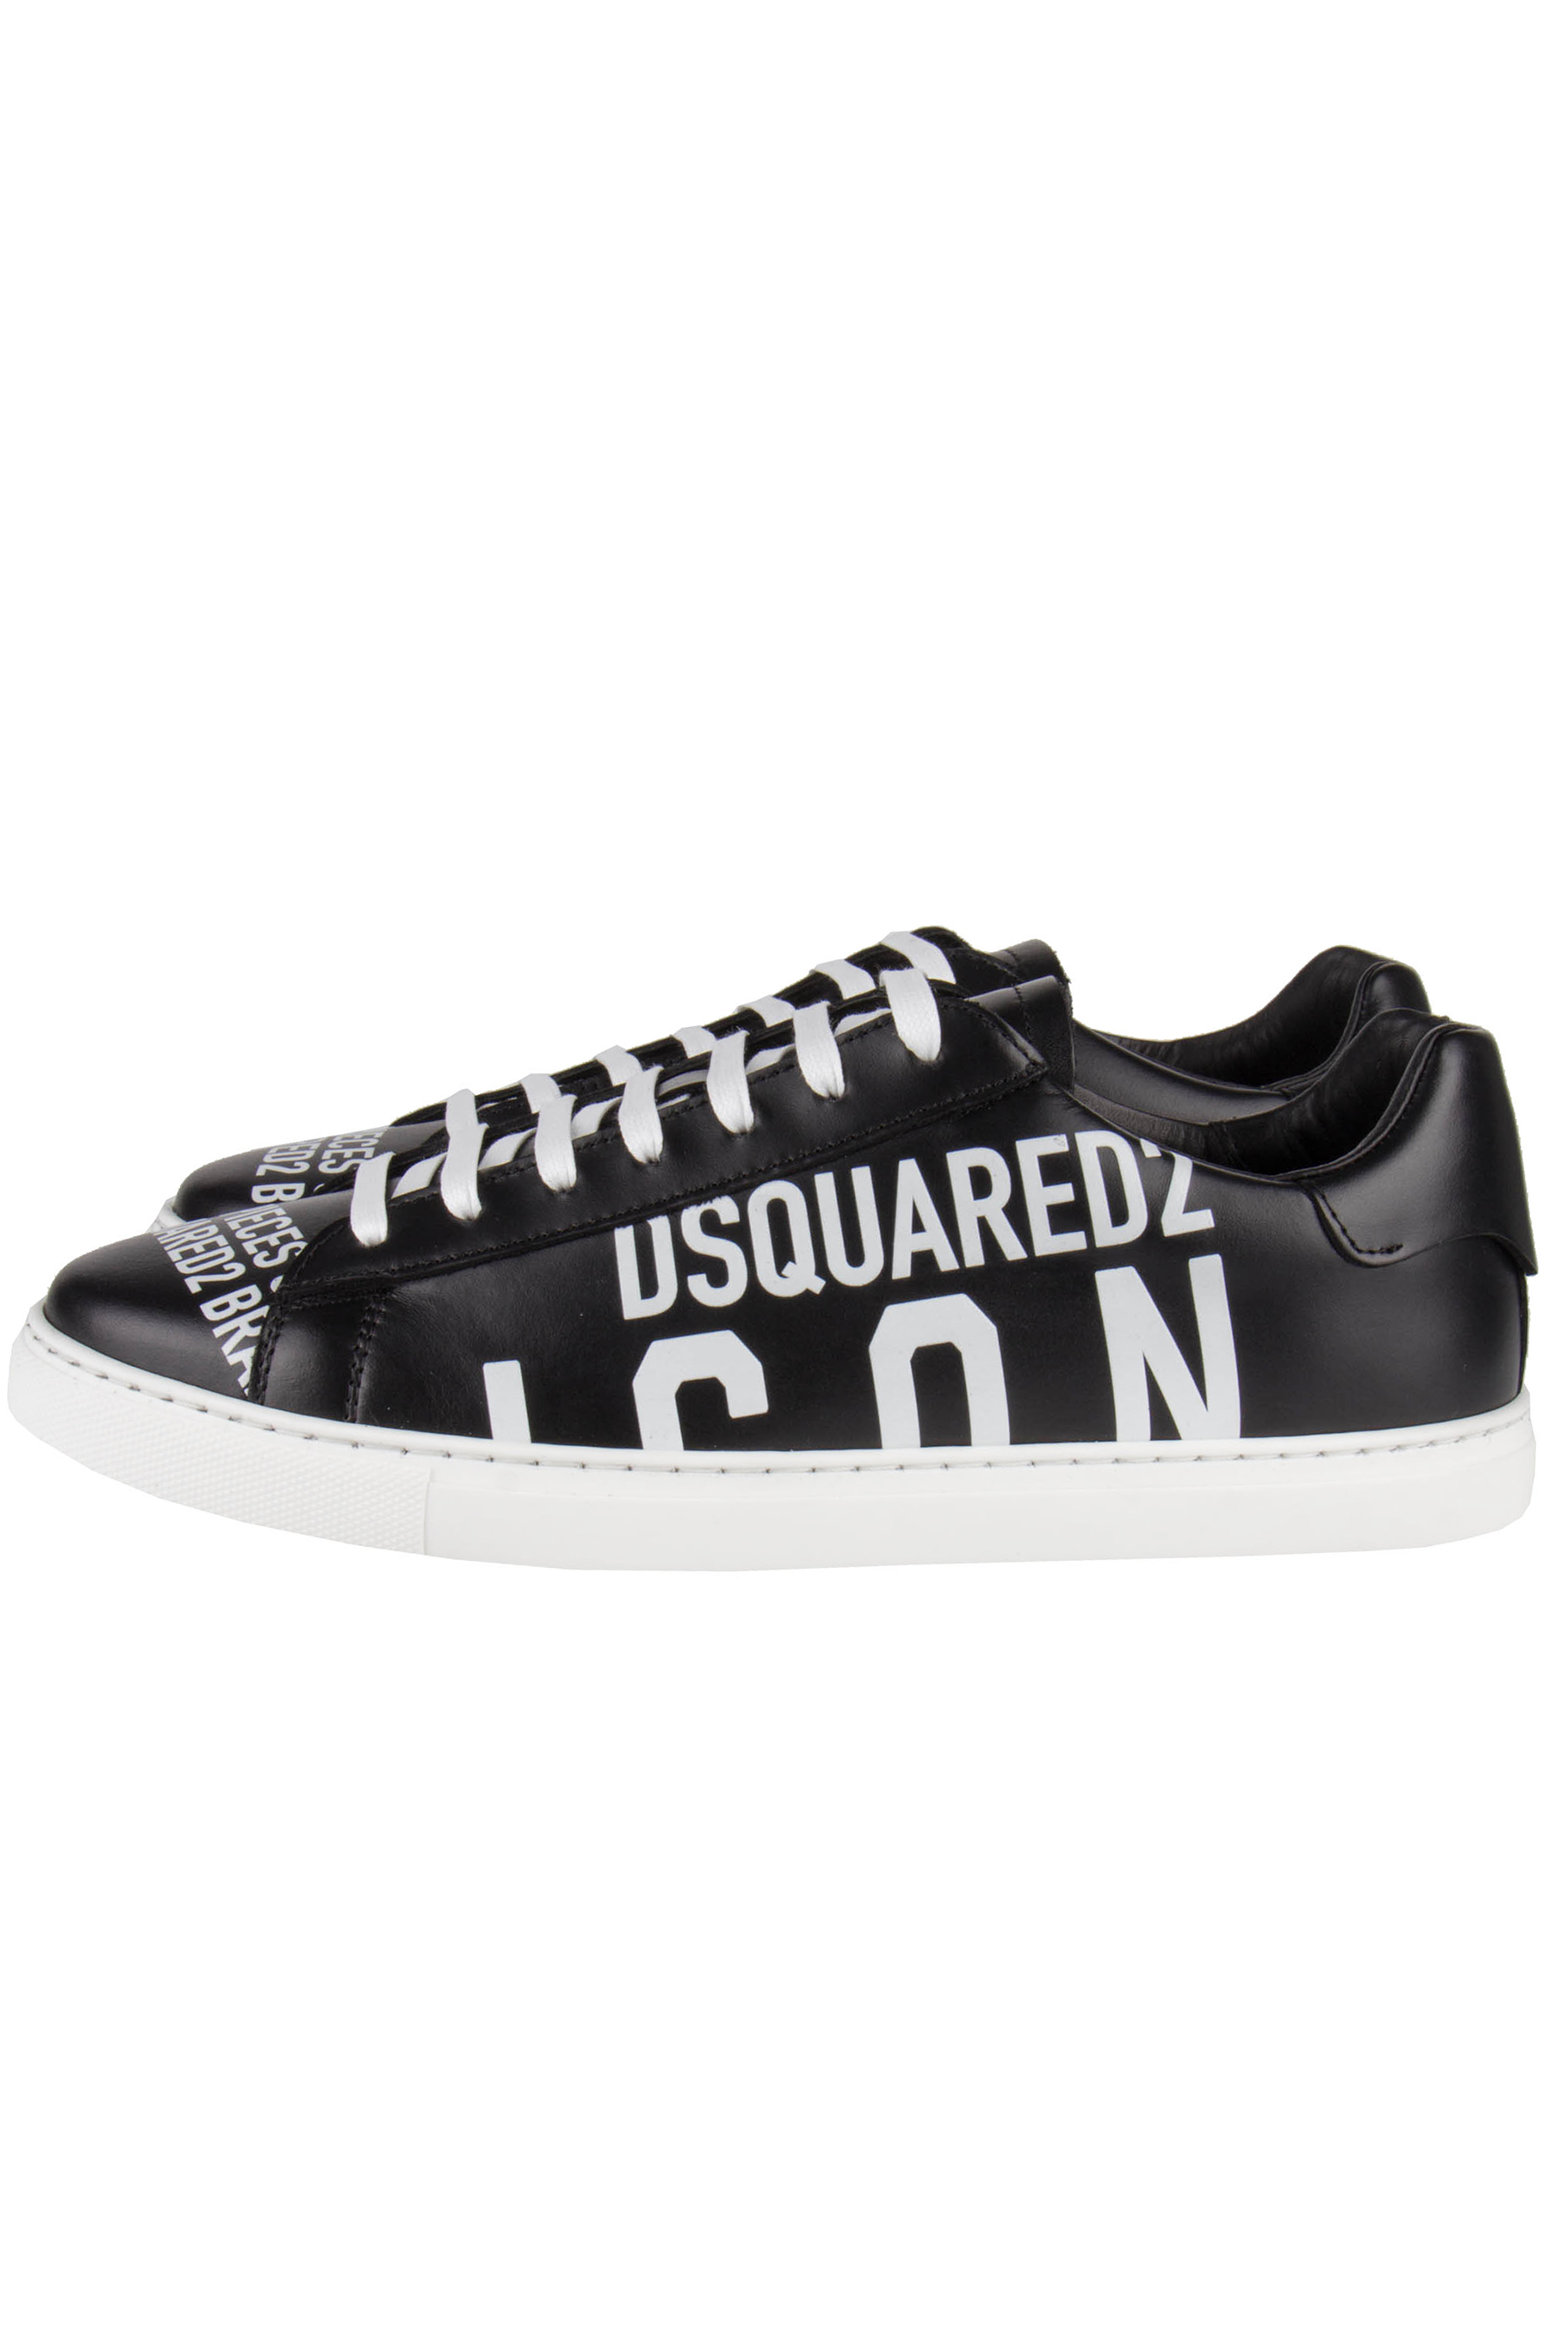 dsquared shoes new